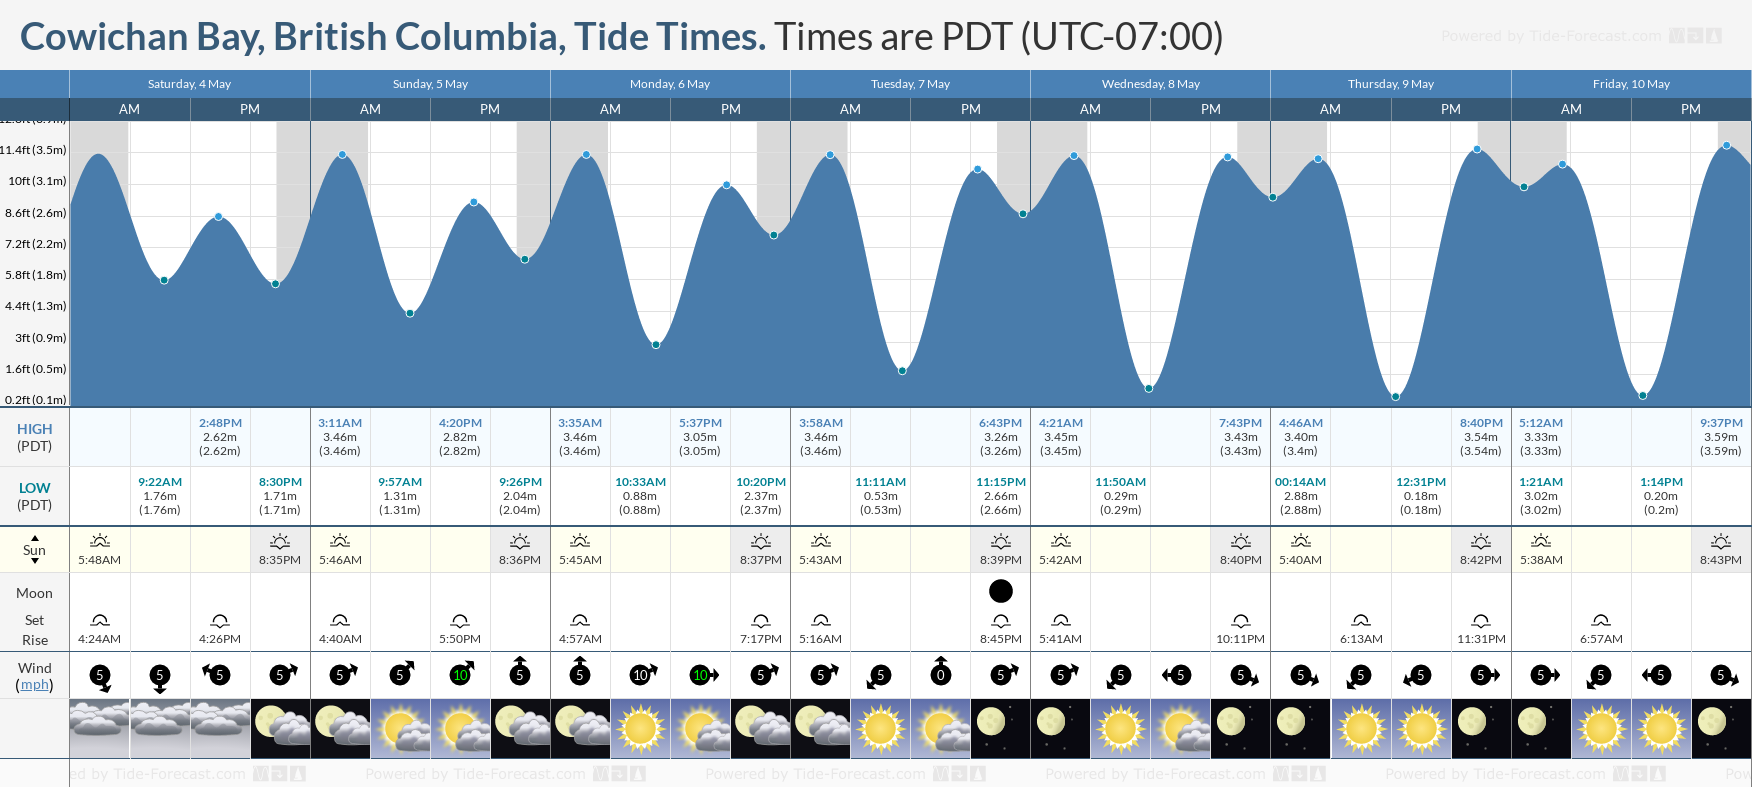 Cowichan Bay, British Columbia Tide Chart including high and low tide tide times for the next 7 days